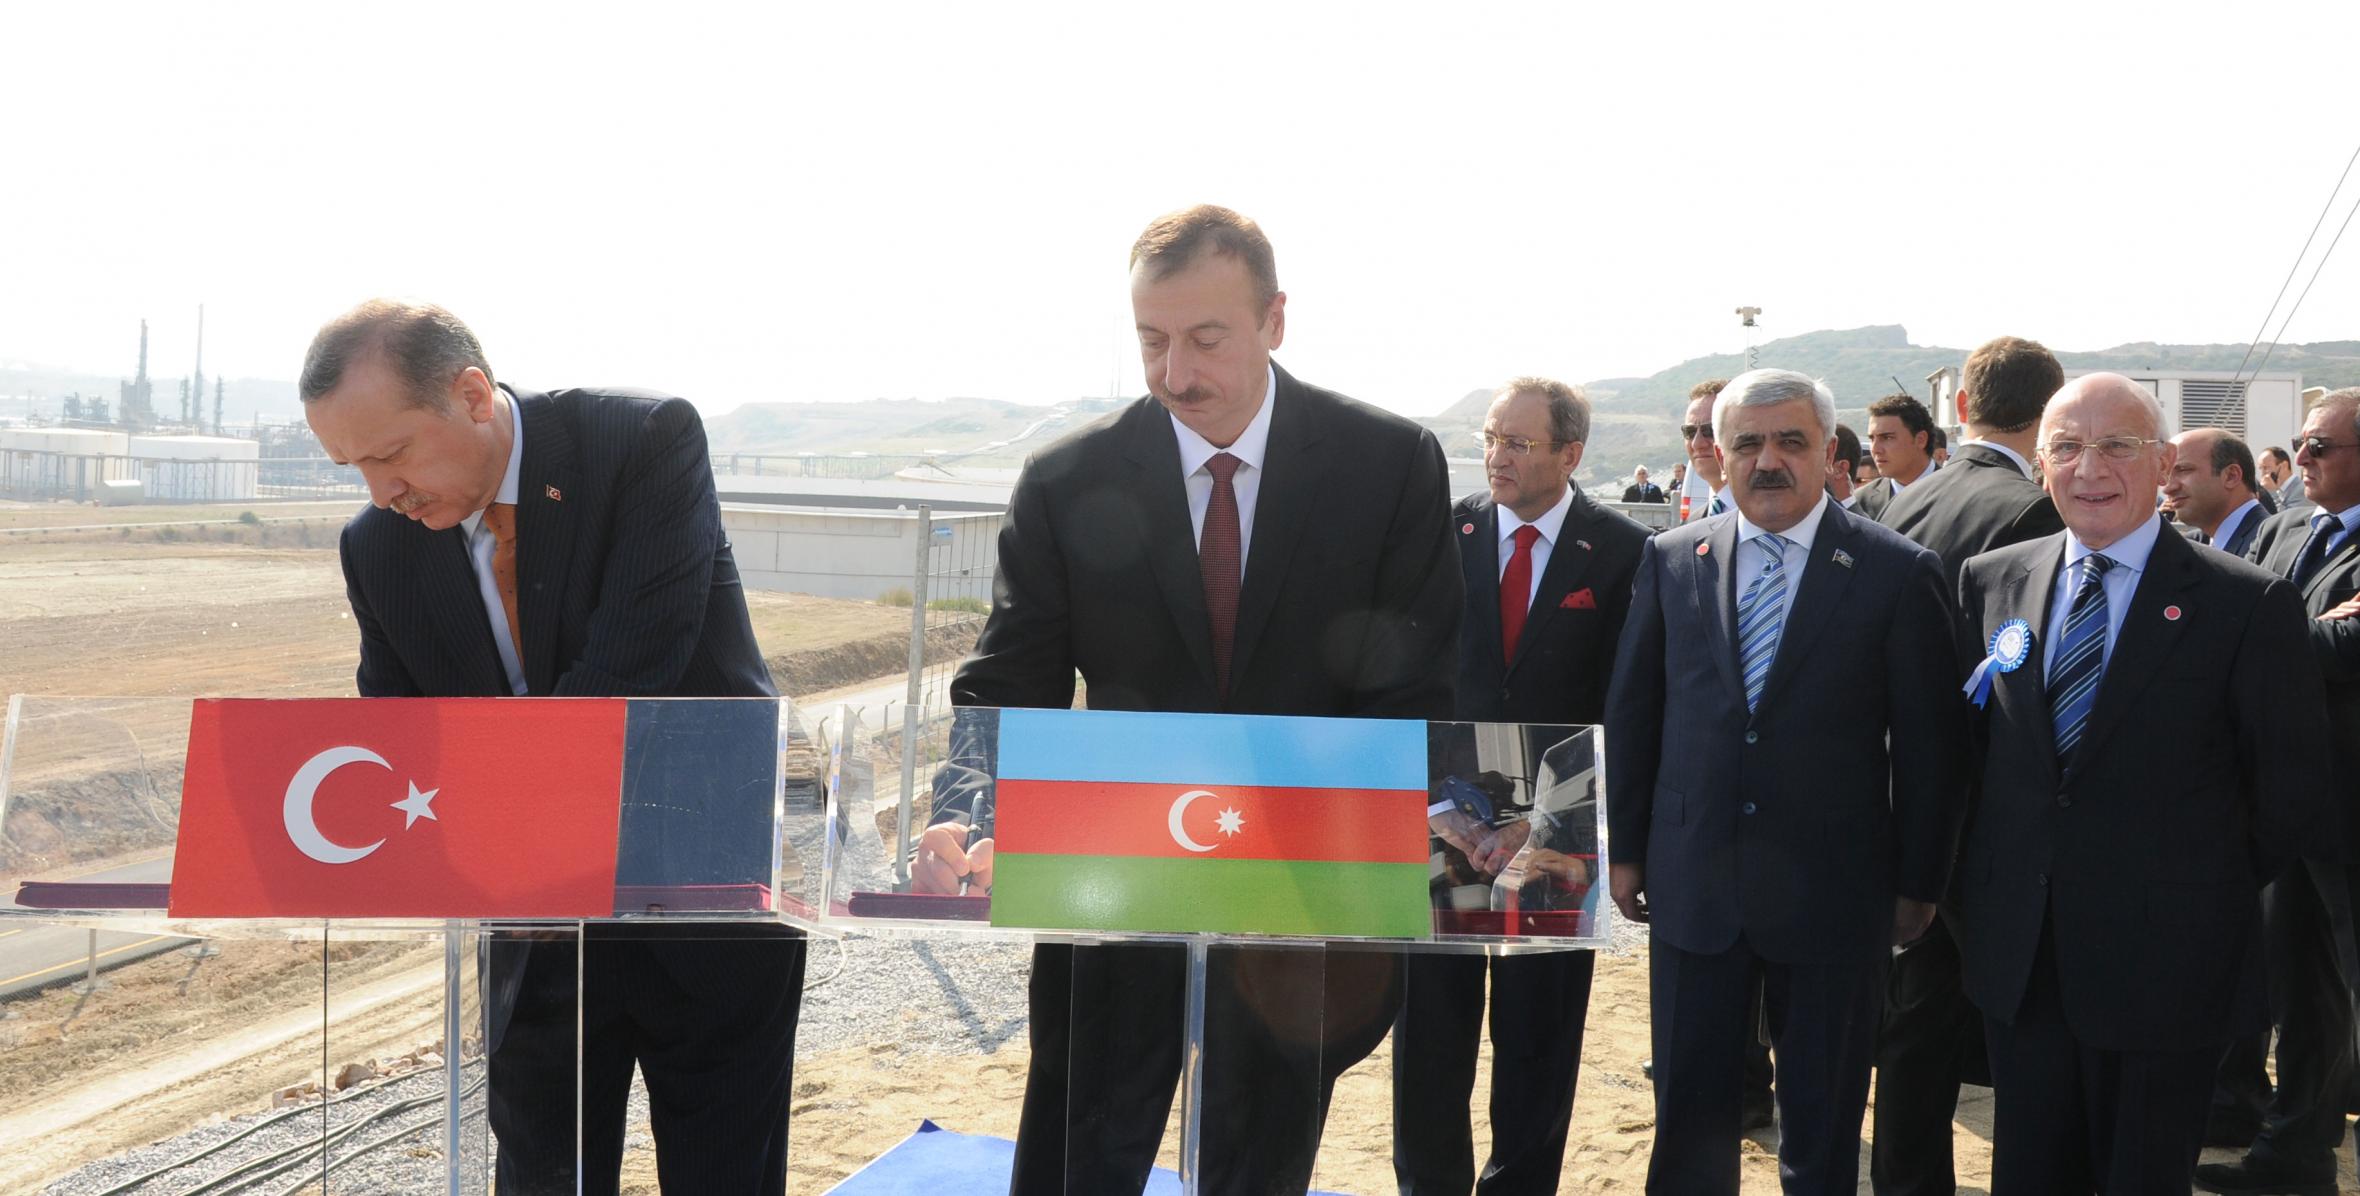 Ilham Aliyev and Turkish Prime Minister Recep Tayyip Erdogan attended the ceremonies to open the AYPE-T factory and to lay the foundation for the Heydar Aliyev vocational lyceum and the Star refinery of Petkim